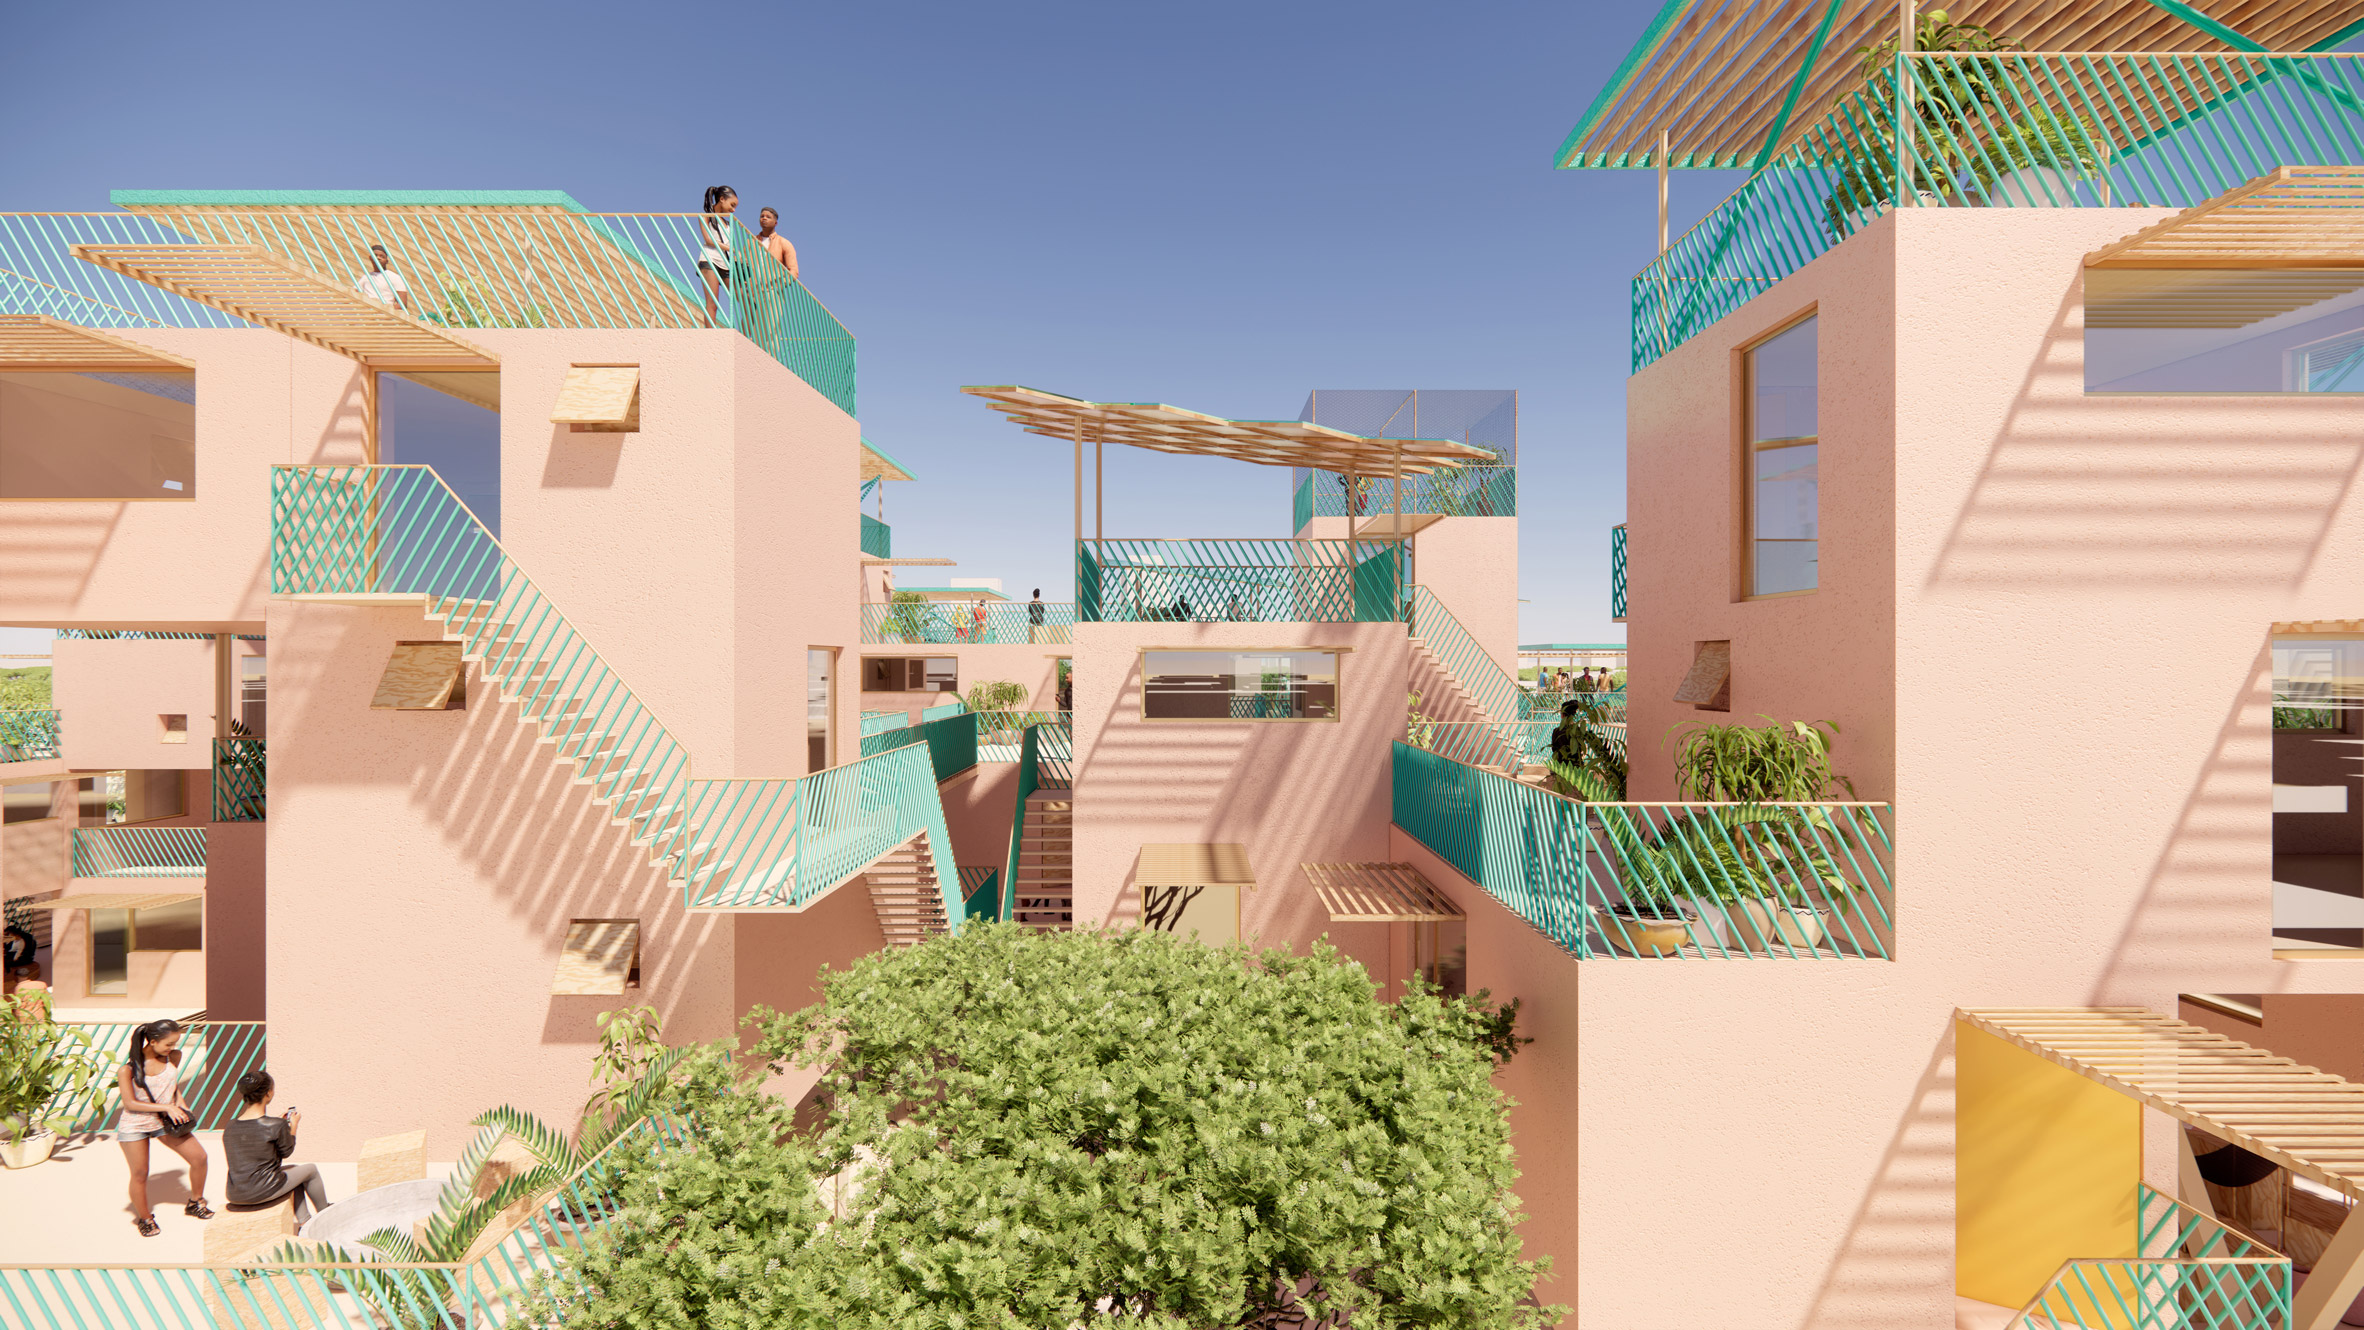 Balconies at recycled plastic houses by Julien de Smedt and Othalo